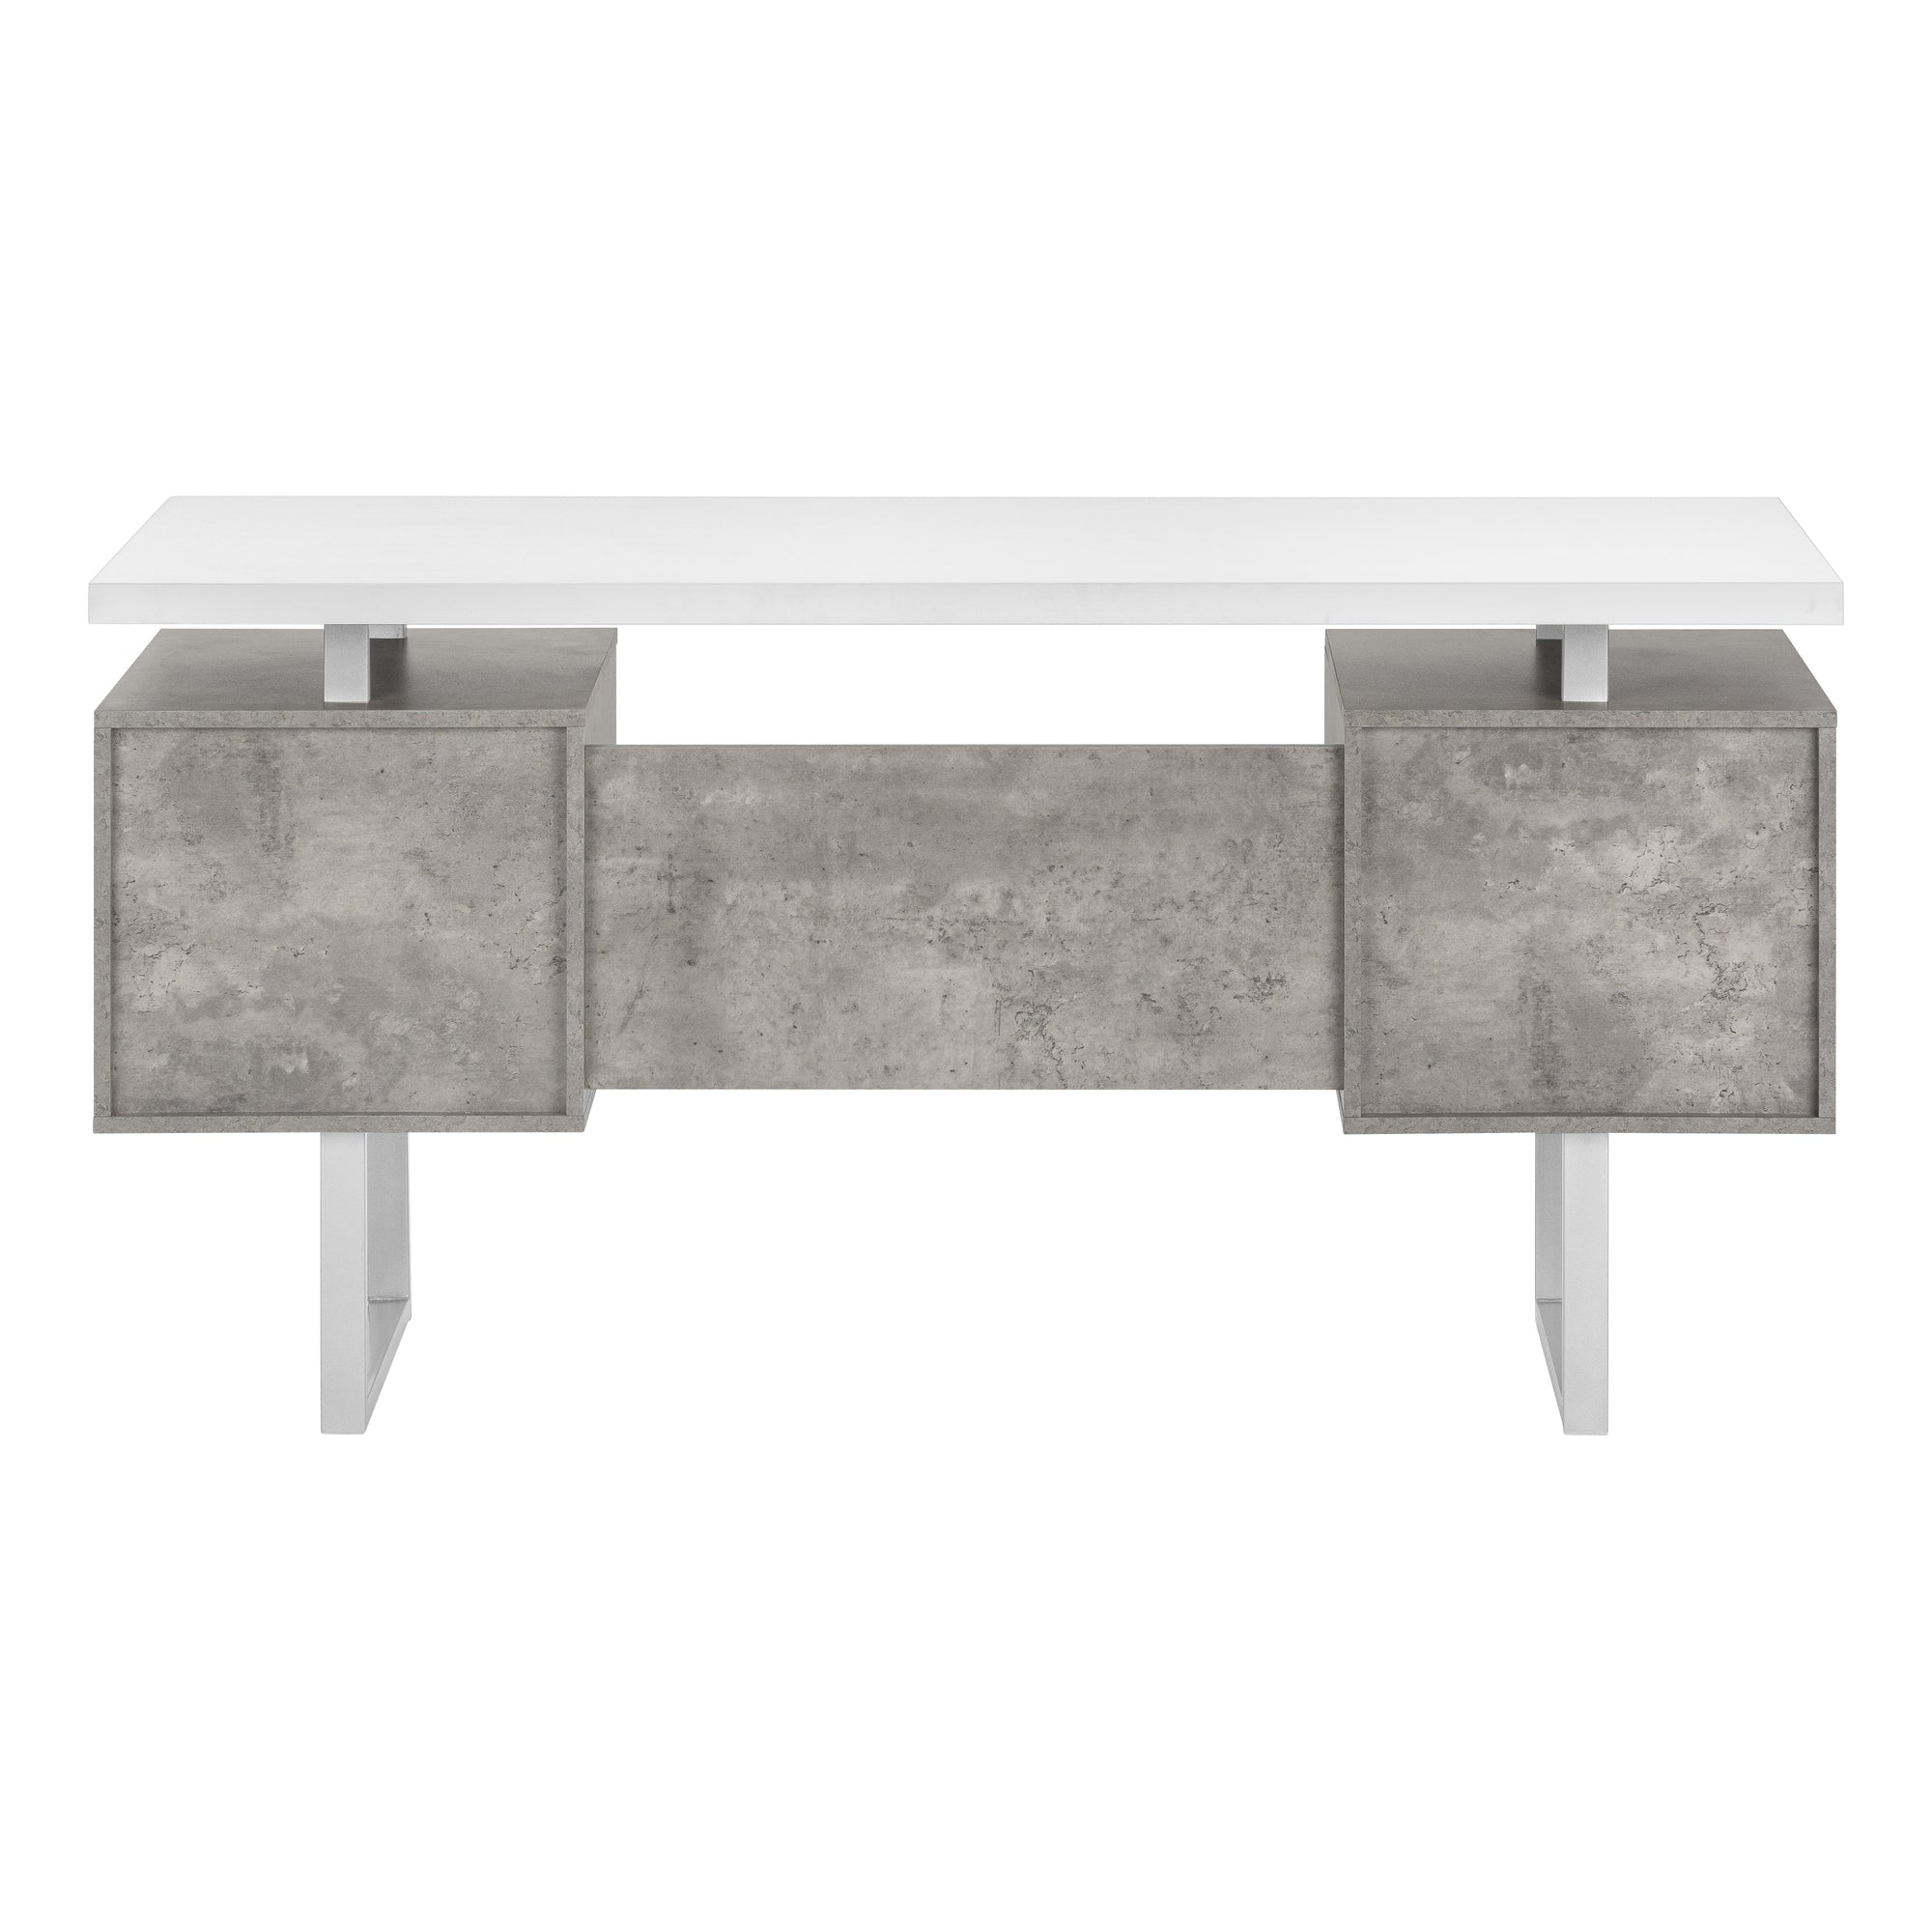 MN-447633    Computer Desk, Home Office, Laptop, Left, Right Set-Up, Storage Drawers, 60"L, Metal, Laminate, Grey Concrete, Silver, Contemporary, Modern